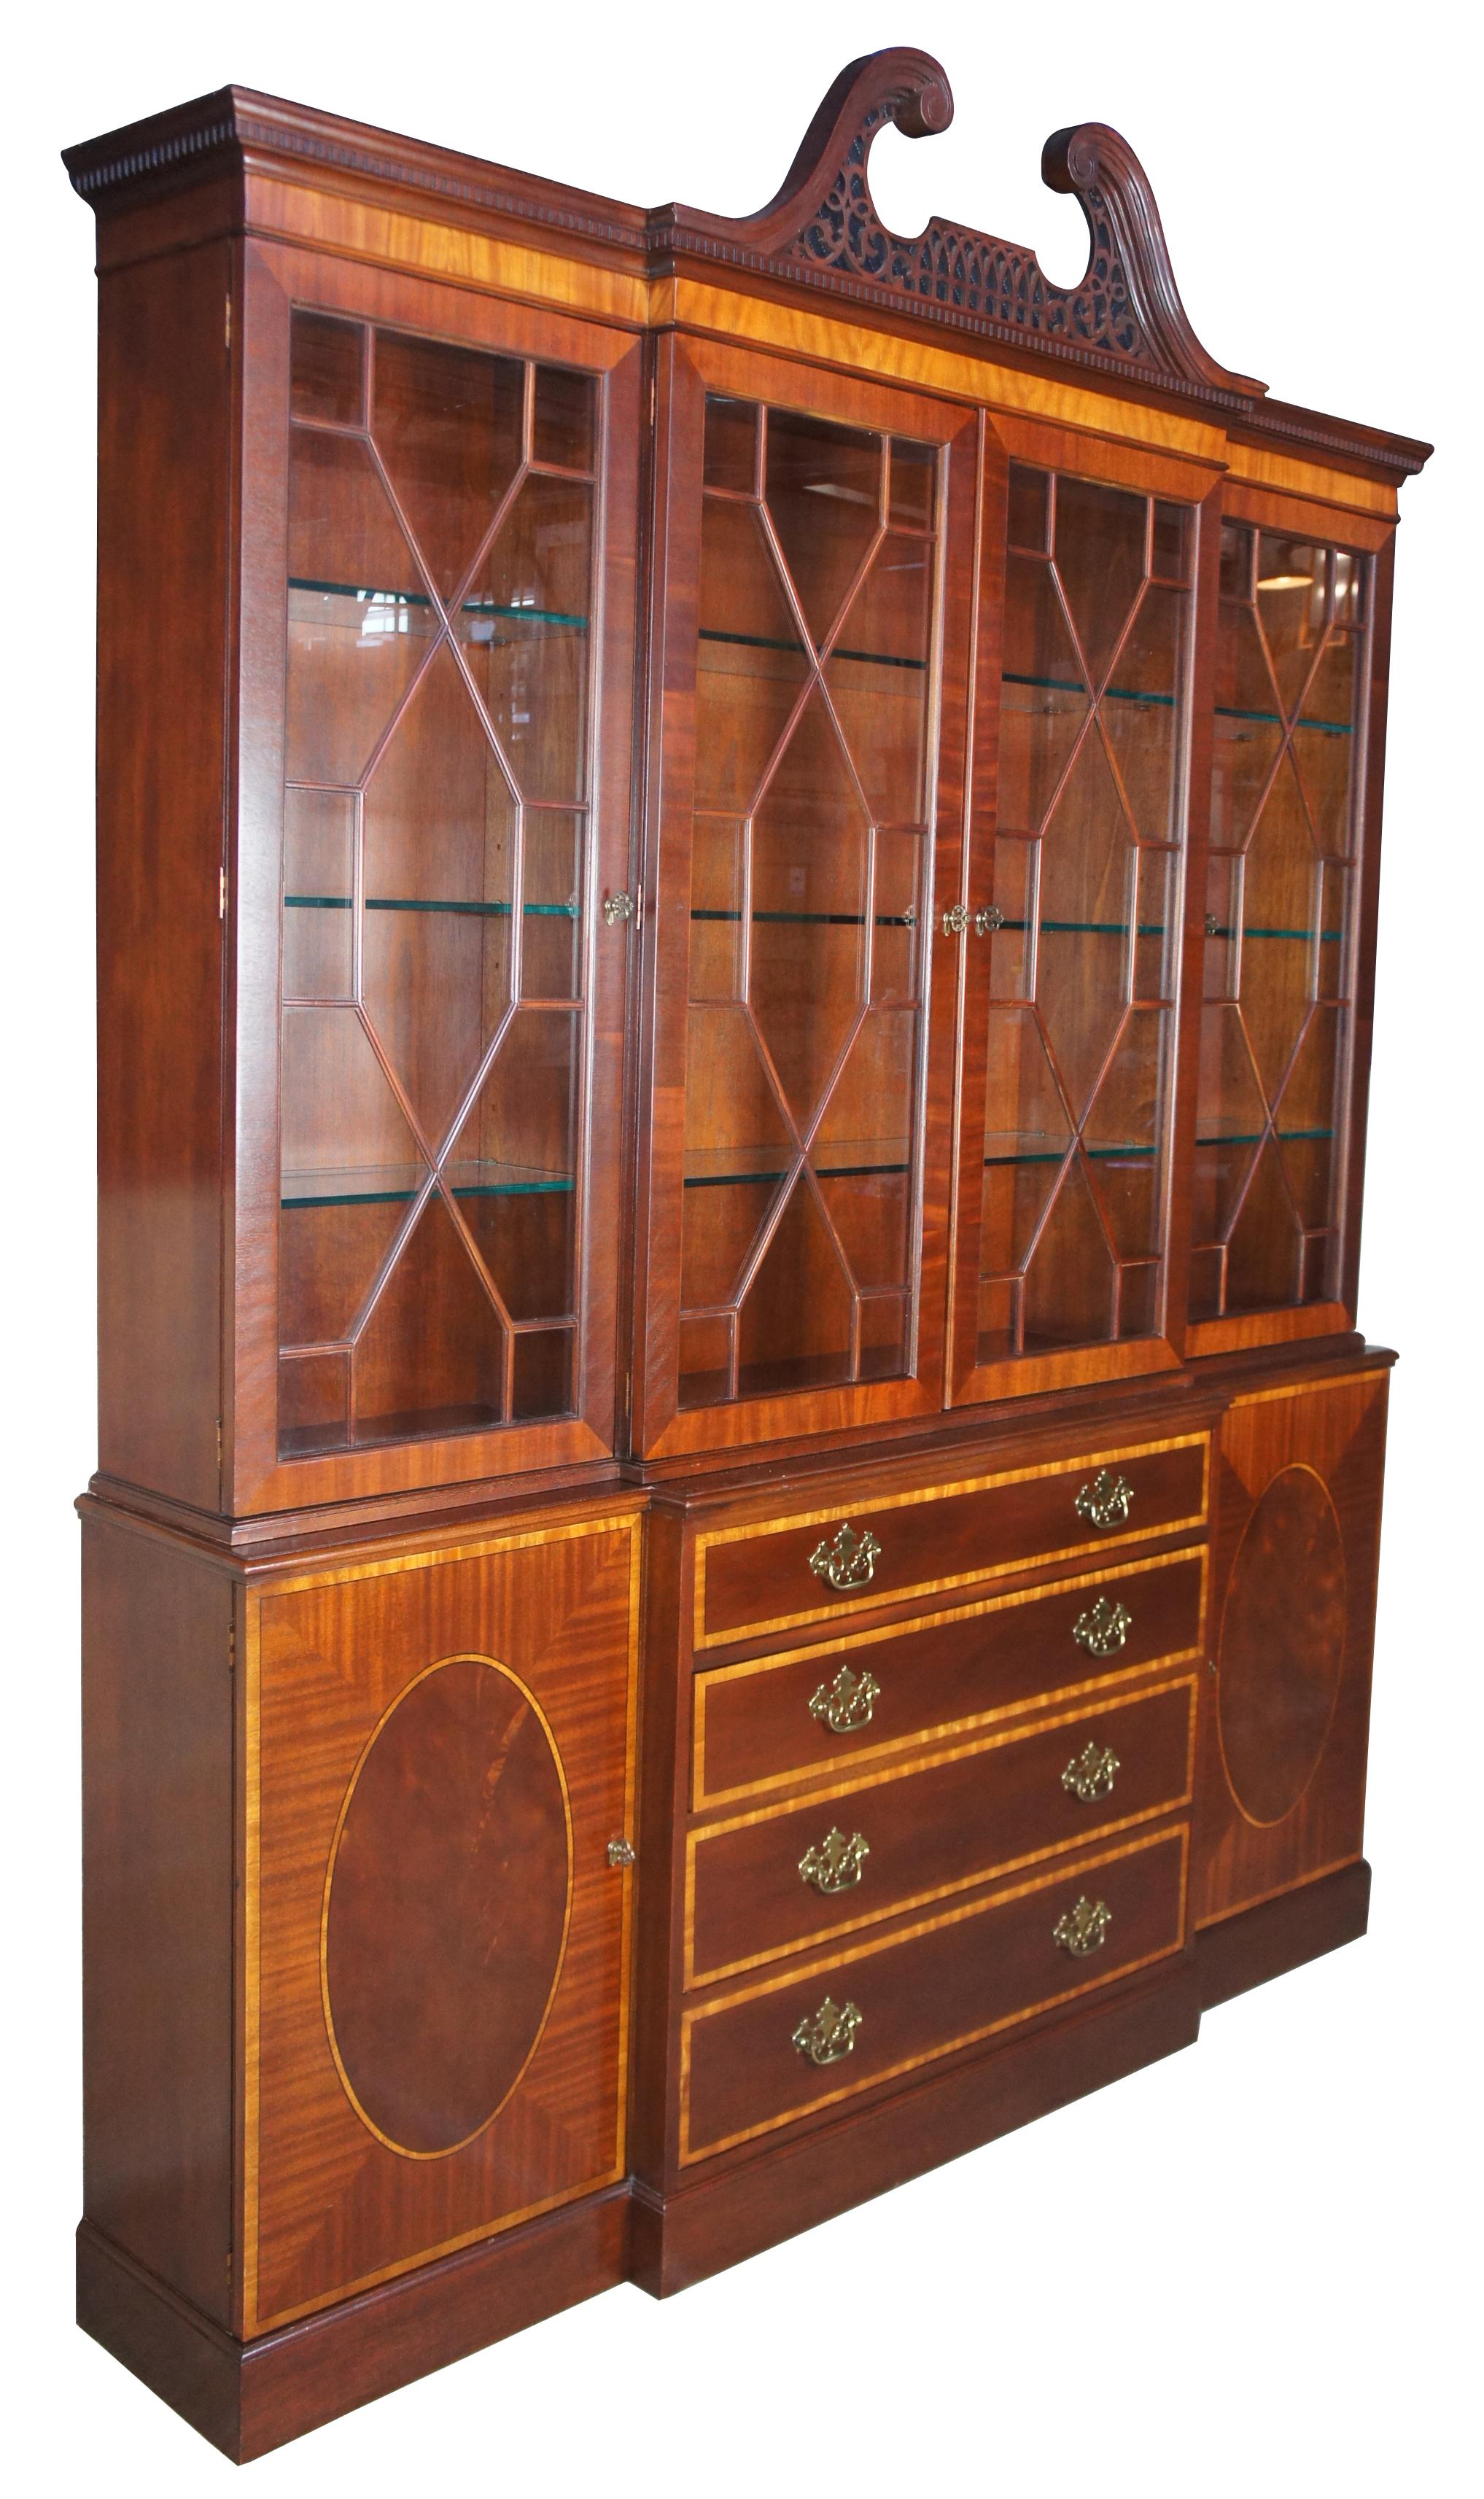 Baker banded mahogany English Chippendale style breakfront China display cabinet

Baker Furniture banded mahogany breakfront, circa 1980s. Features Chippendale styling with fretwork over the doors and along the pierced open pediment crown.